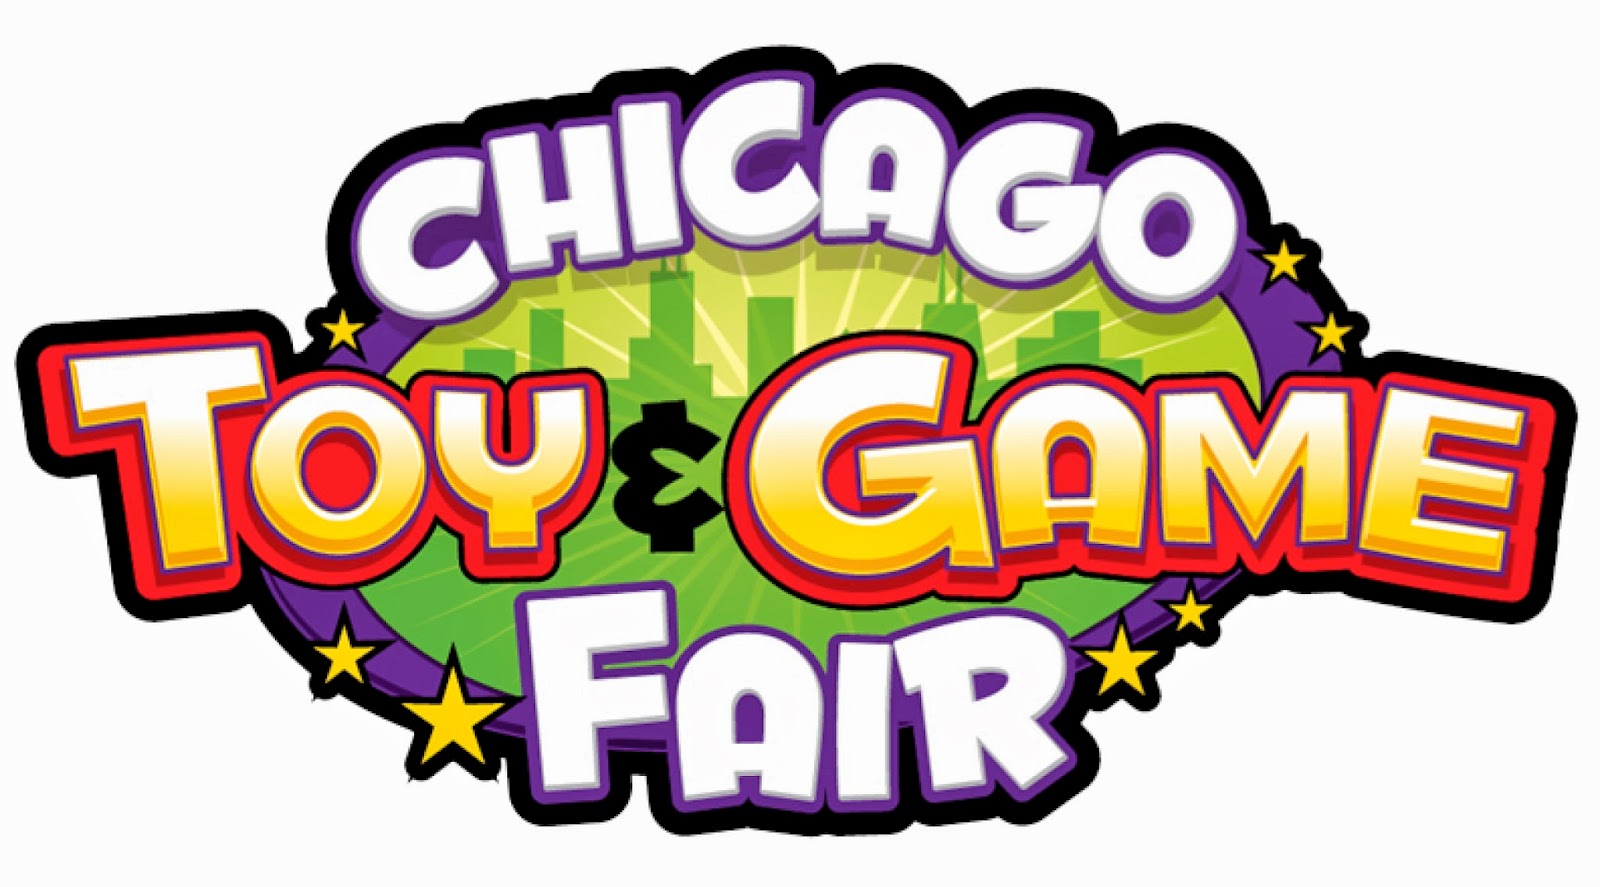 Chicago, ChiTAG Fair, Toys, board games, Family game night, game, photos, discount, coupon, fun, event, family